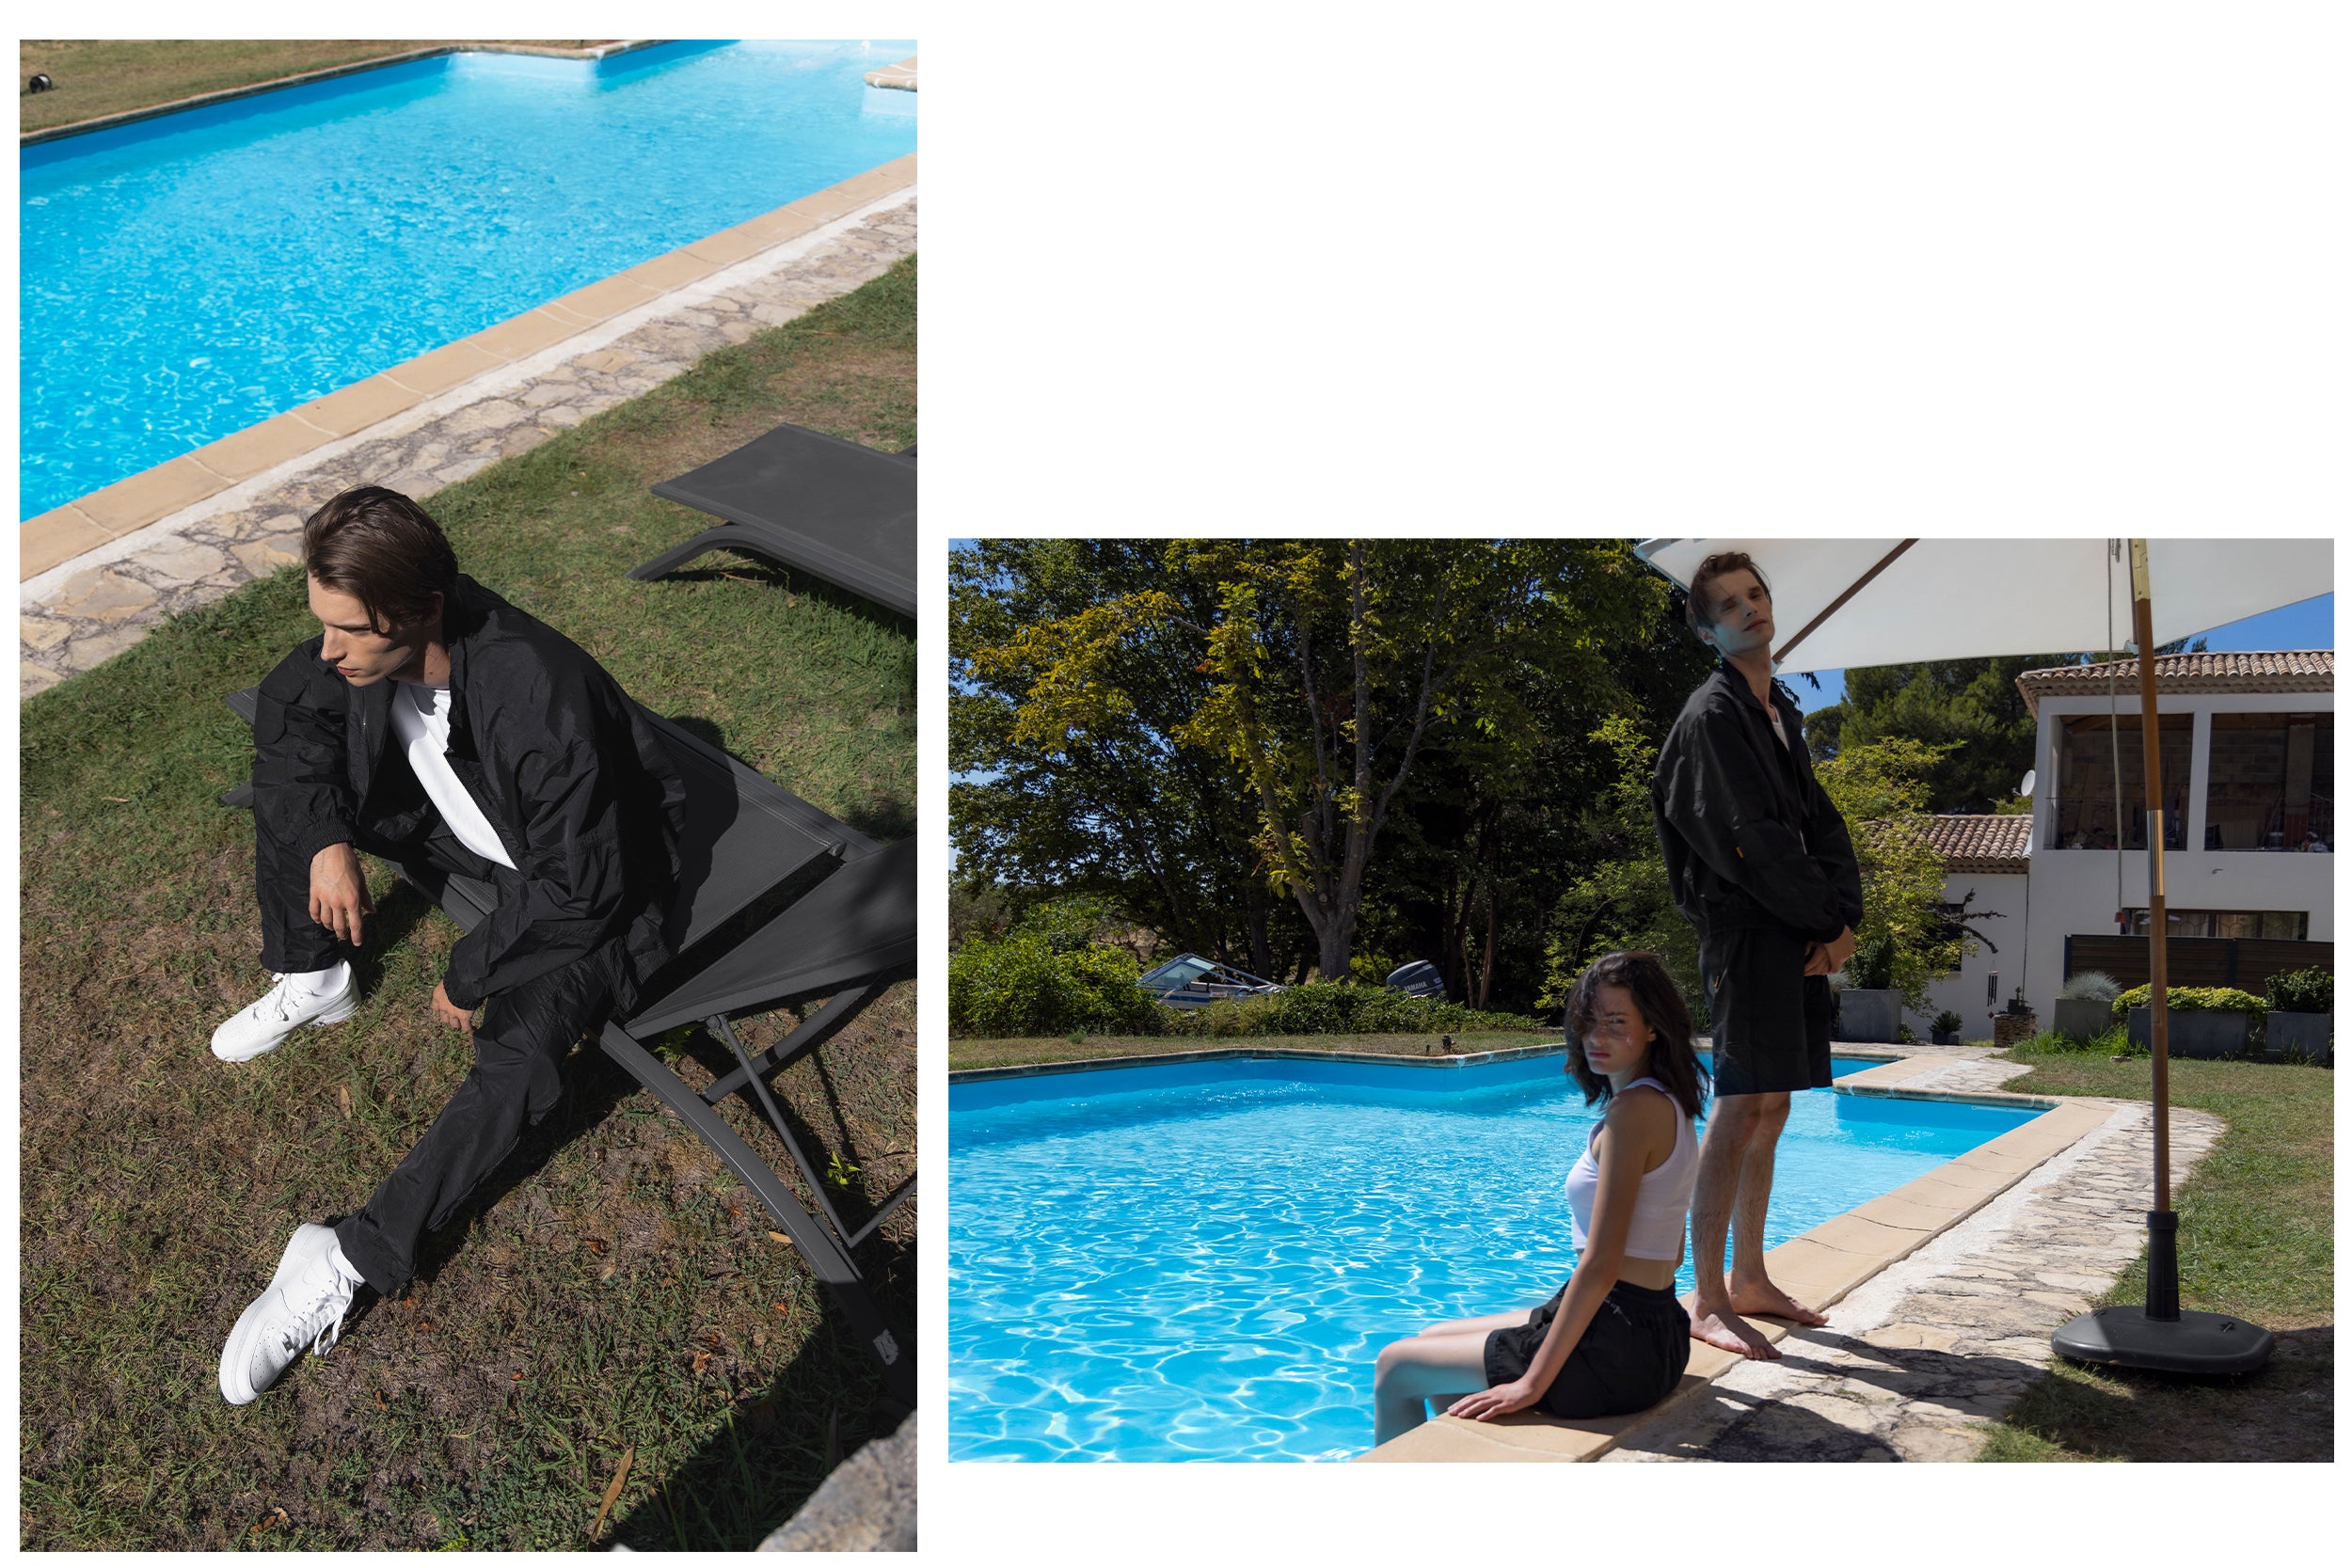 A male model wearing a black zip-up jacket and black cargo shorts is standing next to a pool, while a female model wearing a white tank top and black cargo shorts is sitting next to the pool.